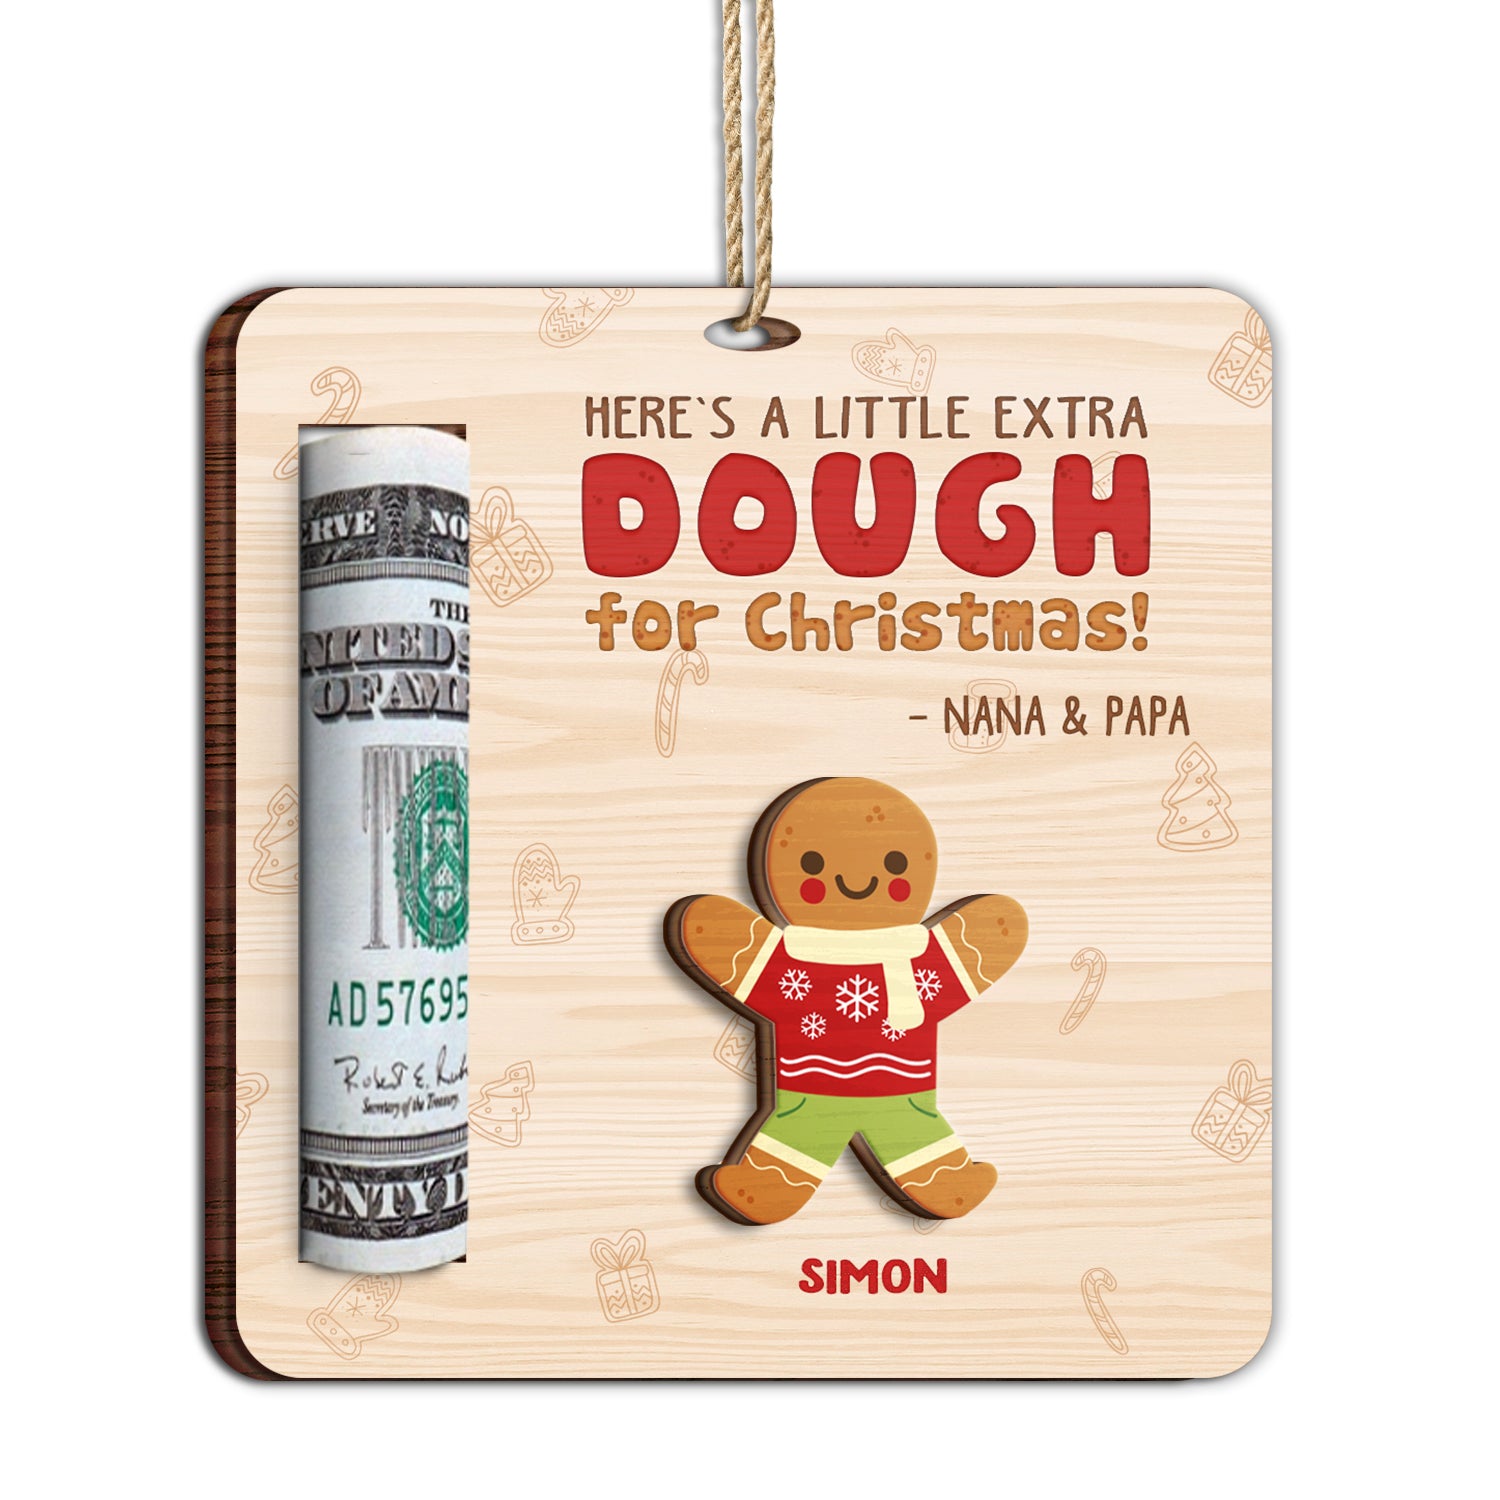 Little Extra Dough - Christmas Gift For Kids - Personalized 2-Layered Wooden Ornament, Money Holder Ornament